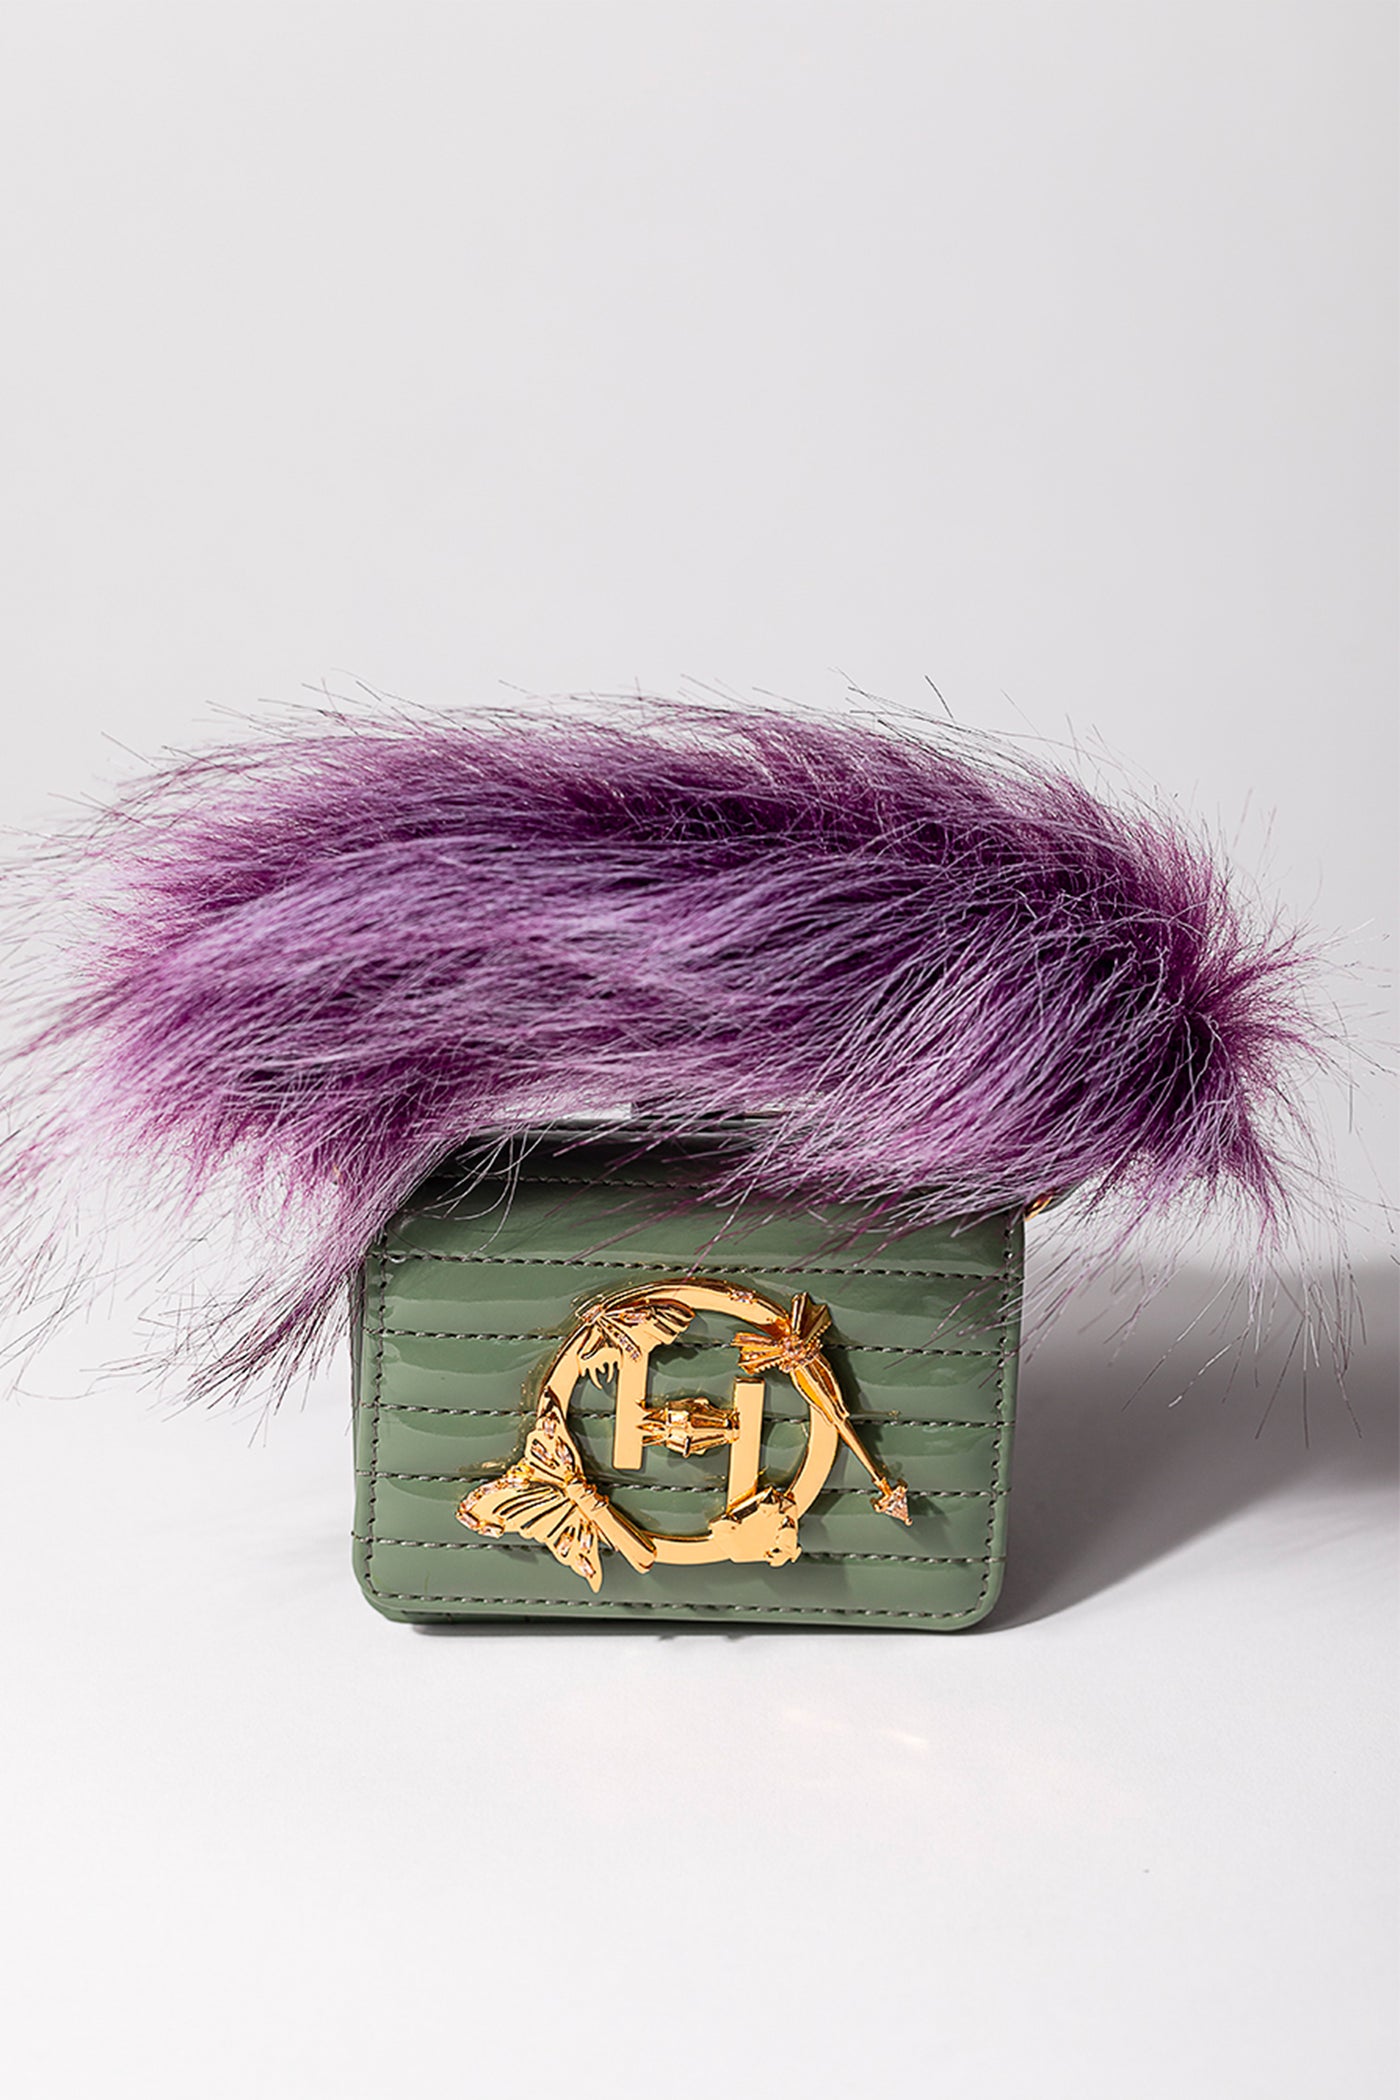 outhouse jewellery The Oh V Furbie - Fern Green bag accessories online shopping melange singapore indian designer wear